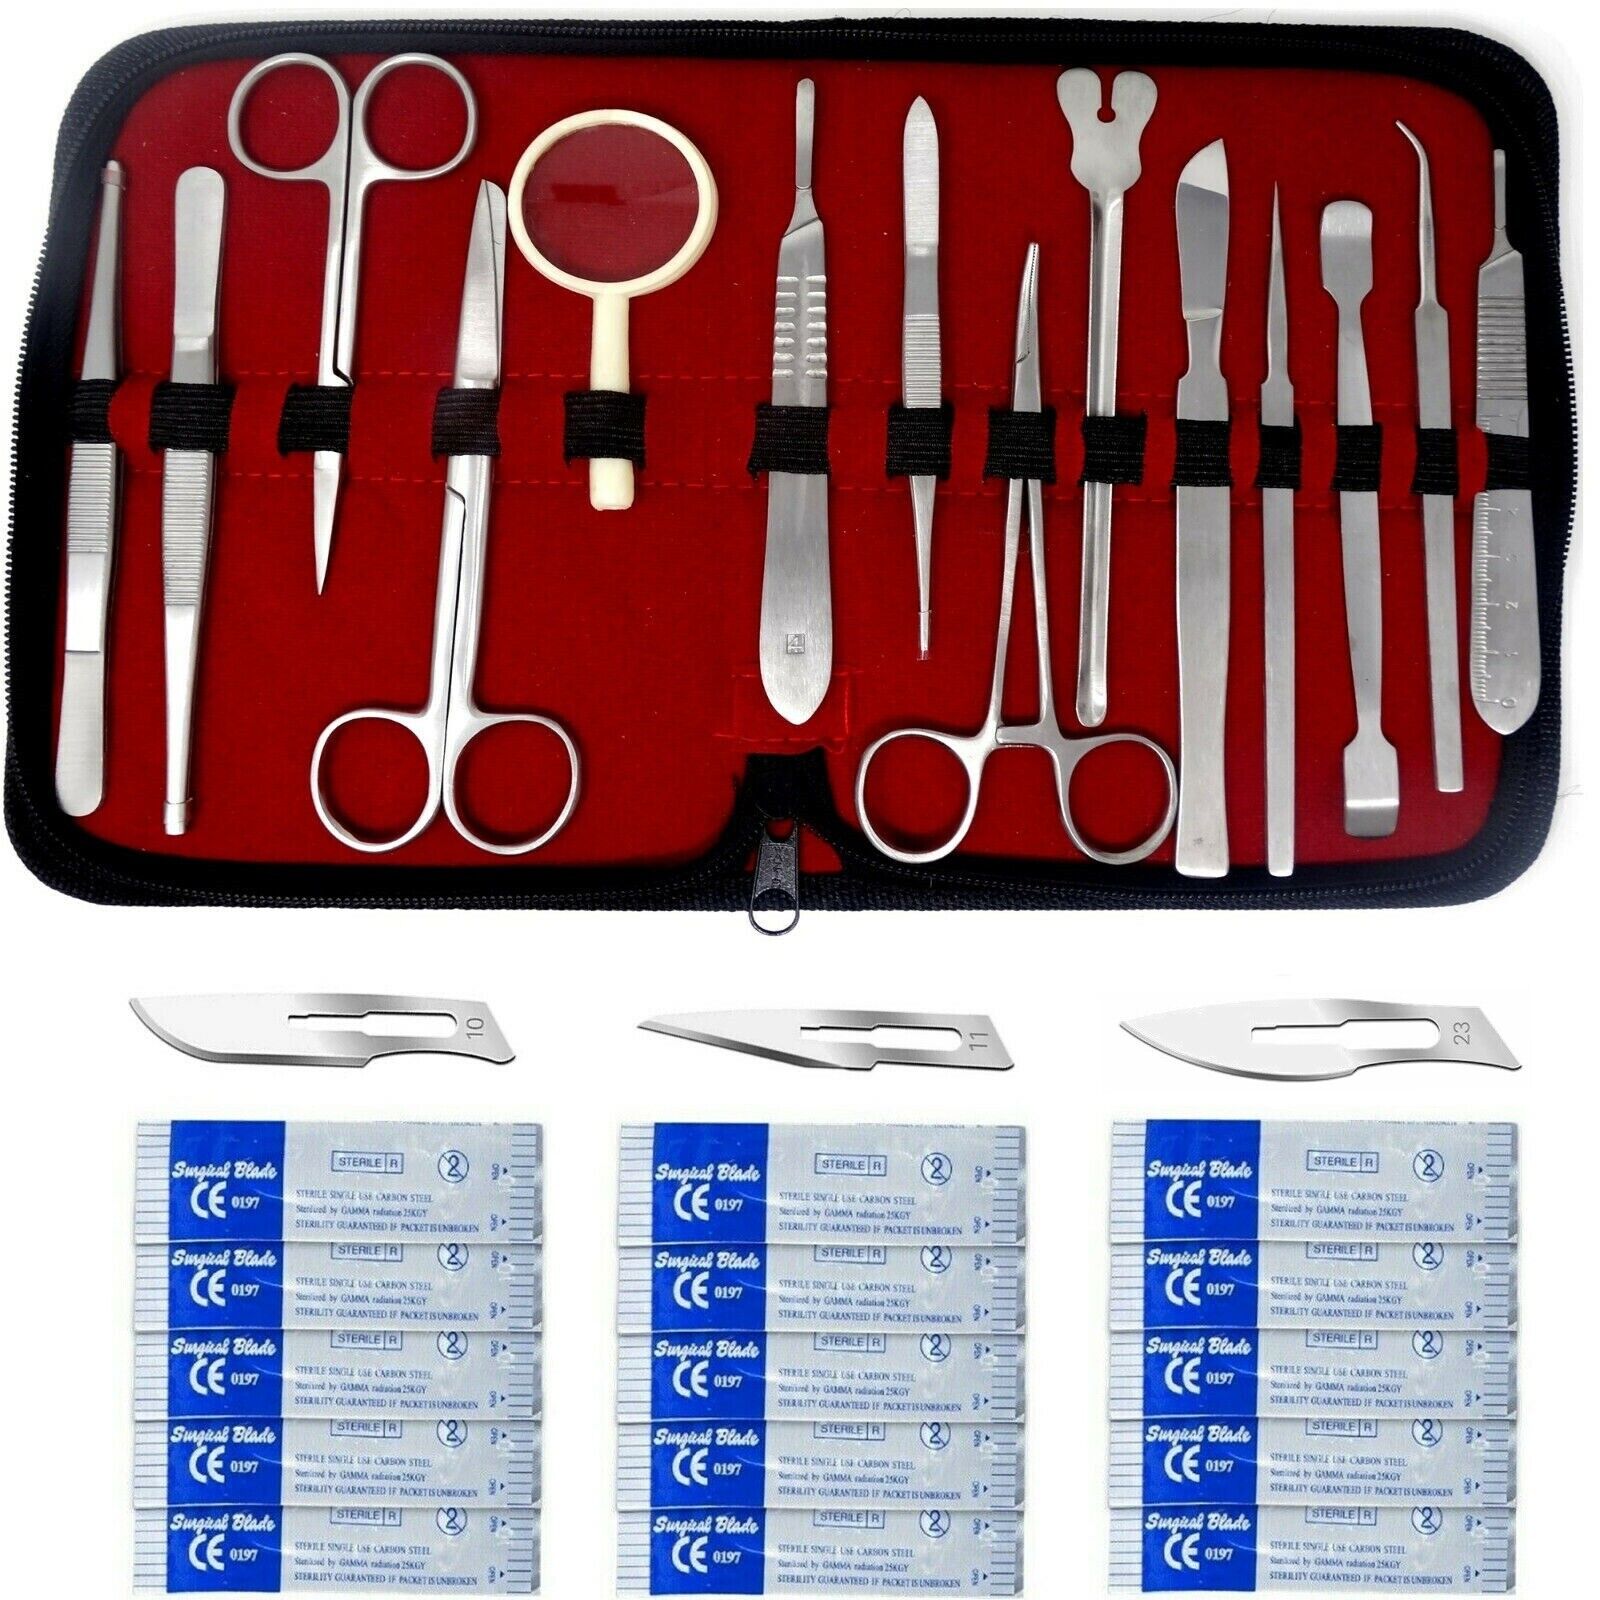 44 Pcs Science Students & Teacher Dissection Kit Advanced Dissection Instruments HTI Does Not Apply - фотография #2